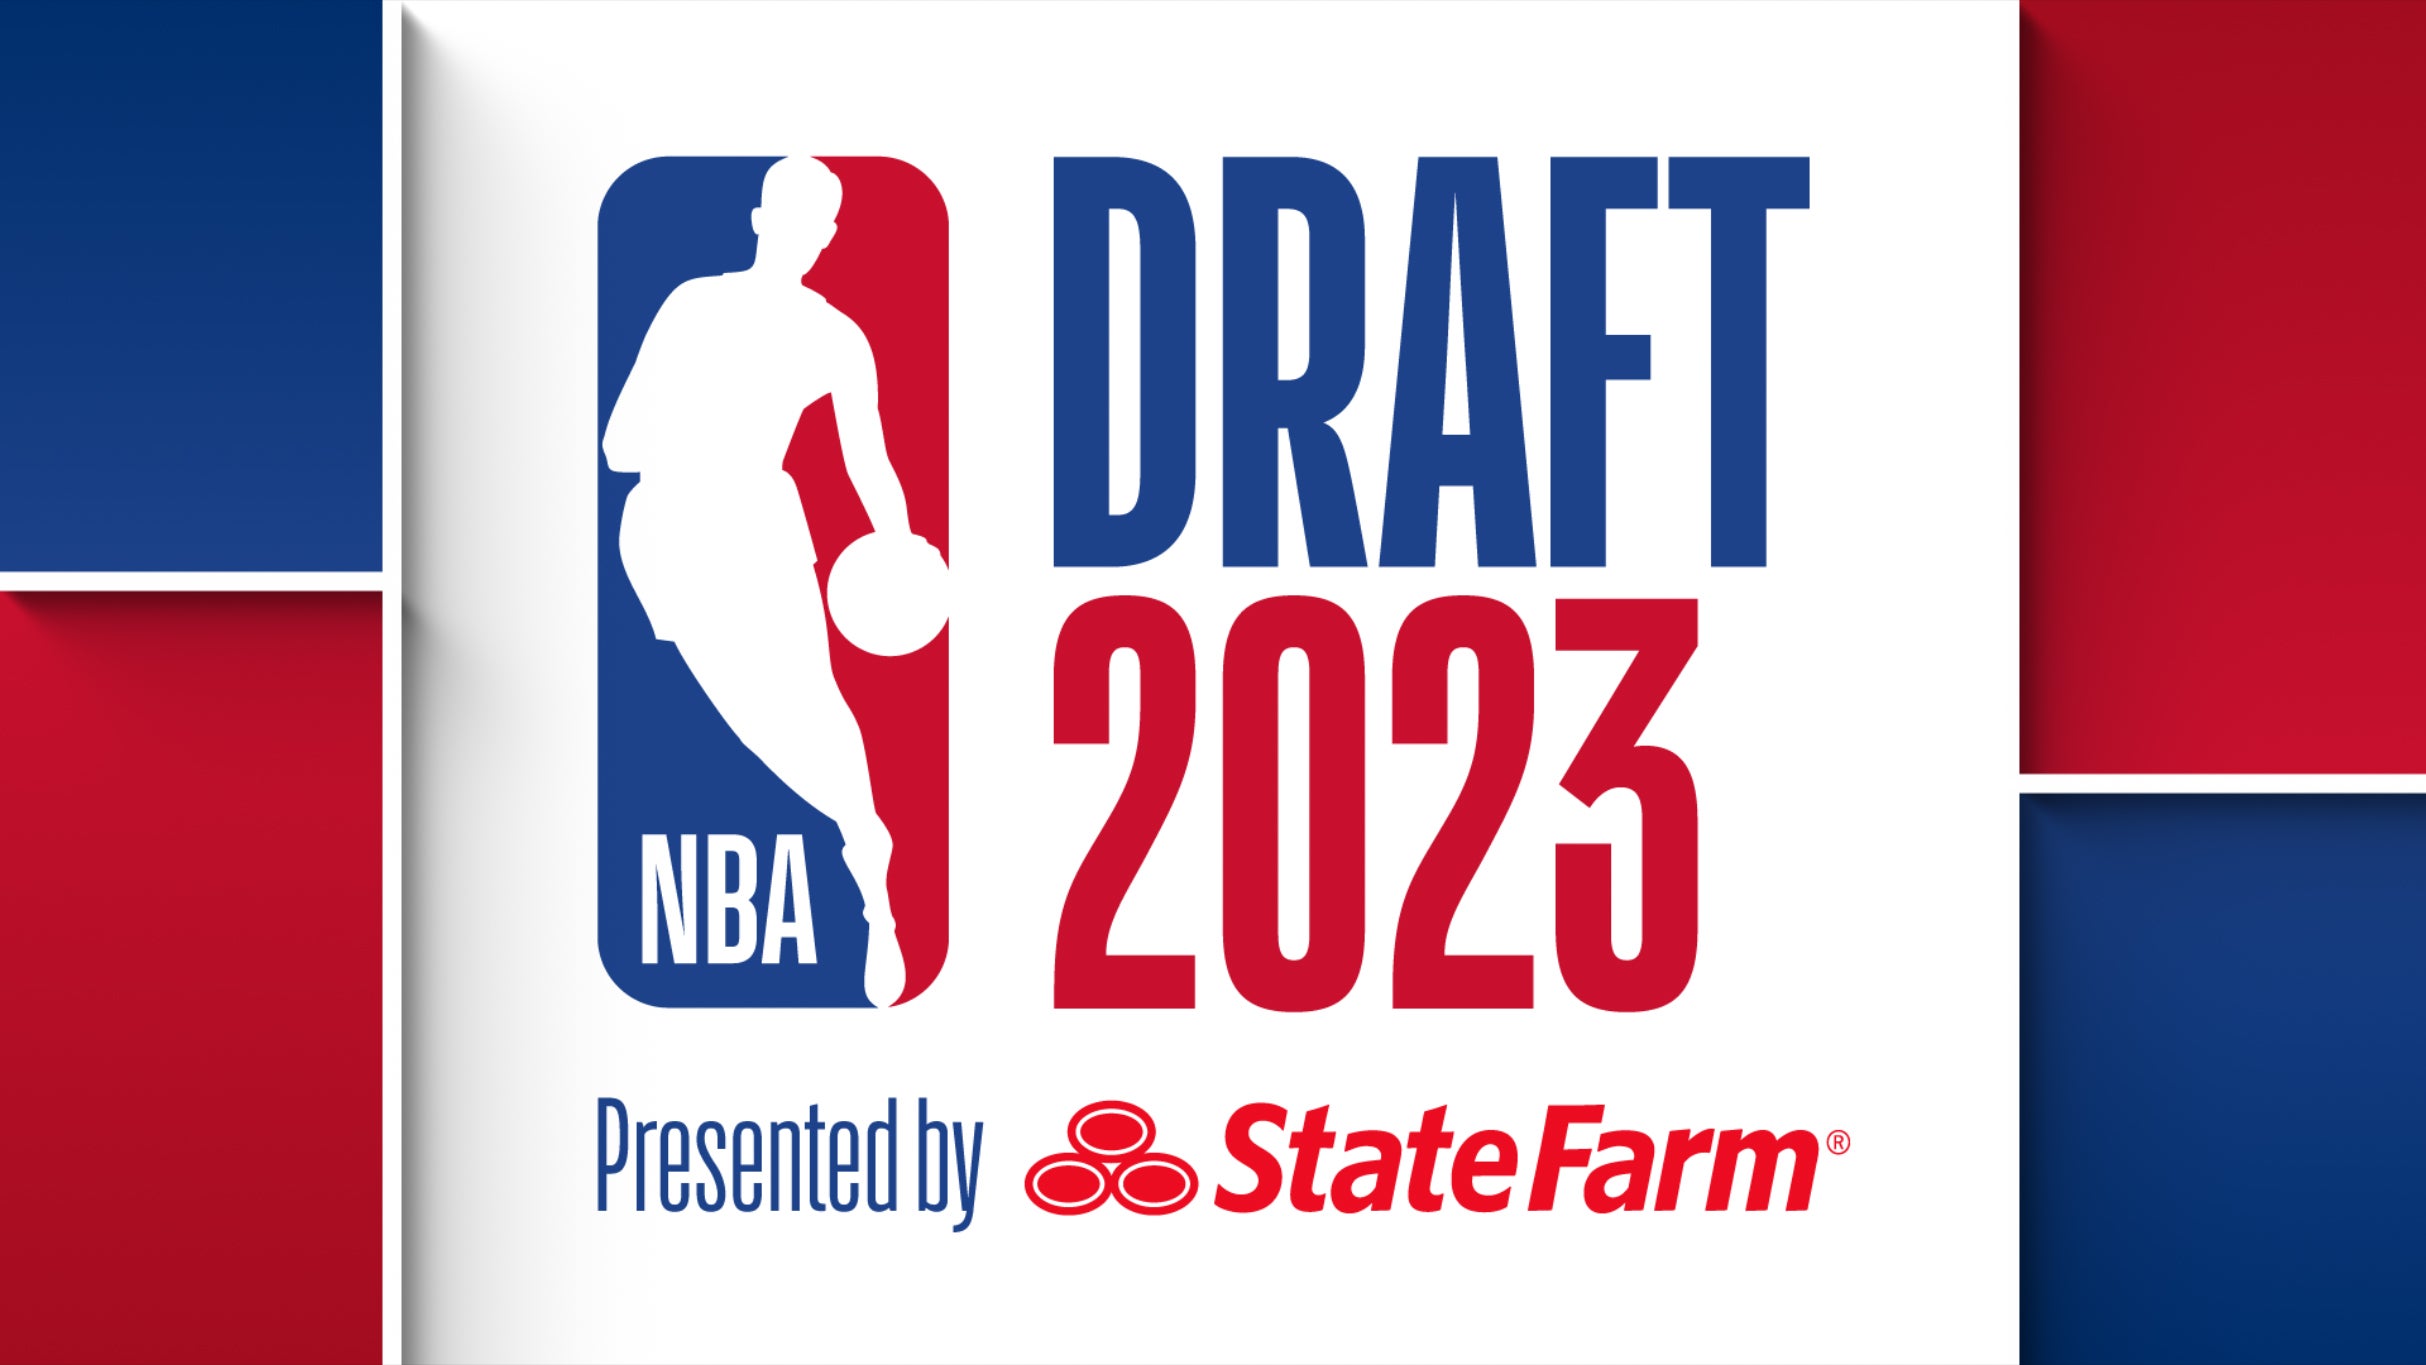 NBA Draft 2023 presented by State Farm free presale pasword for early tickets in Brooklyn